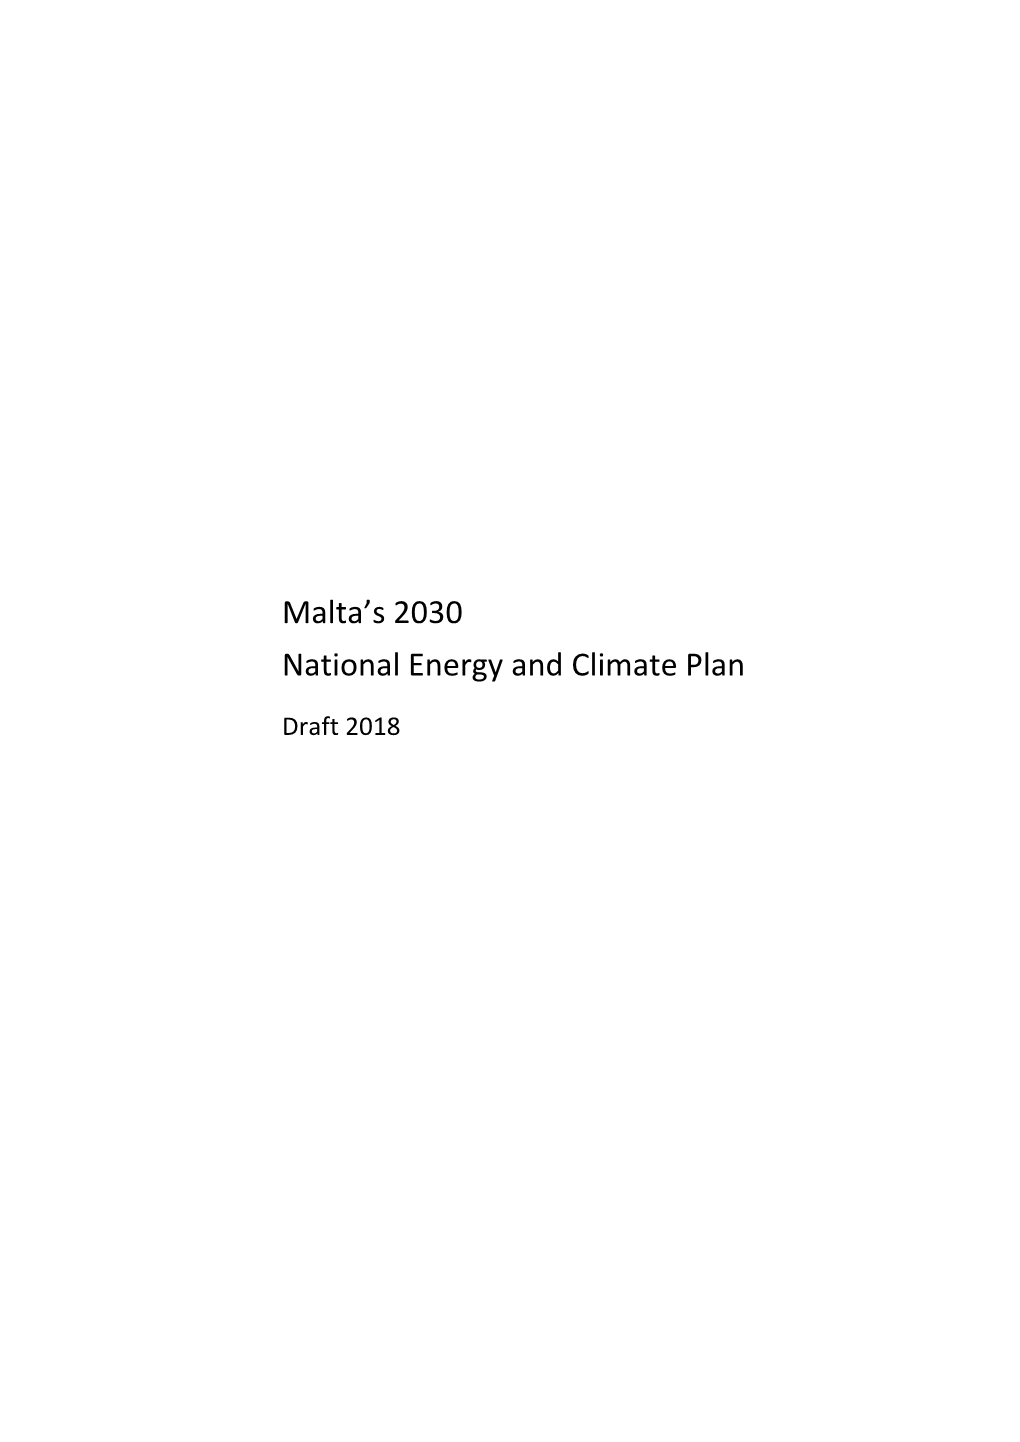 Malta's 2030 National Energy and Climate Plan